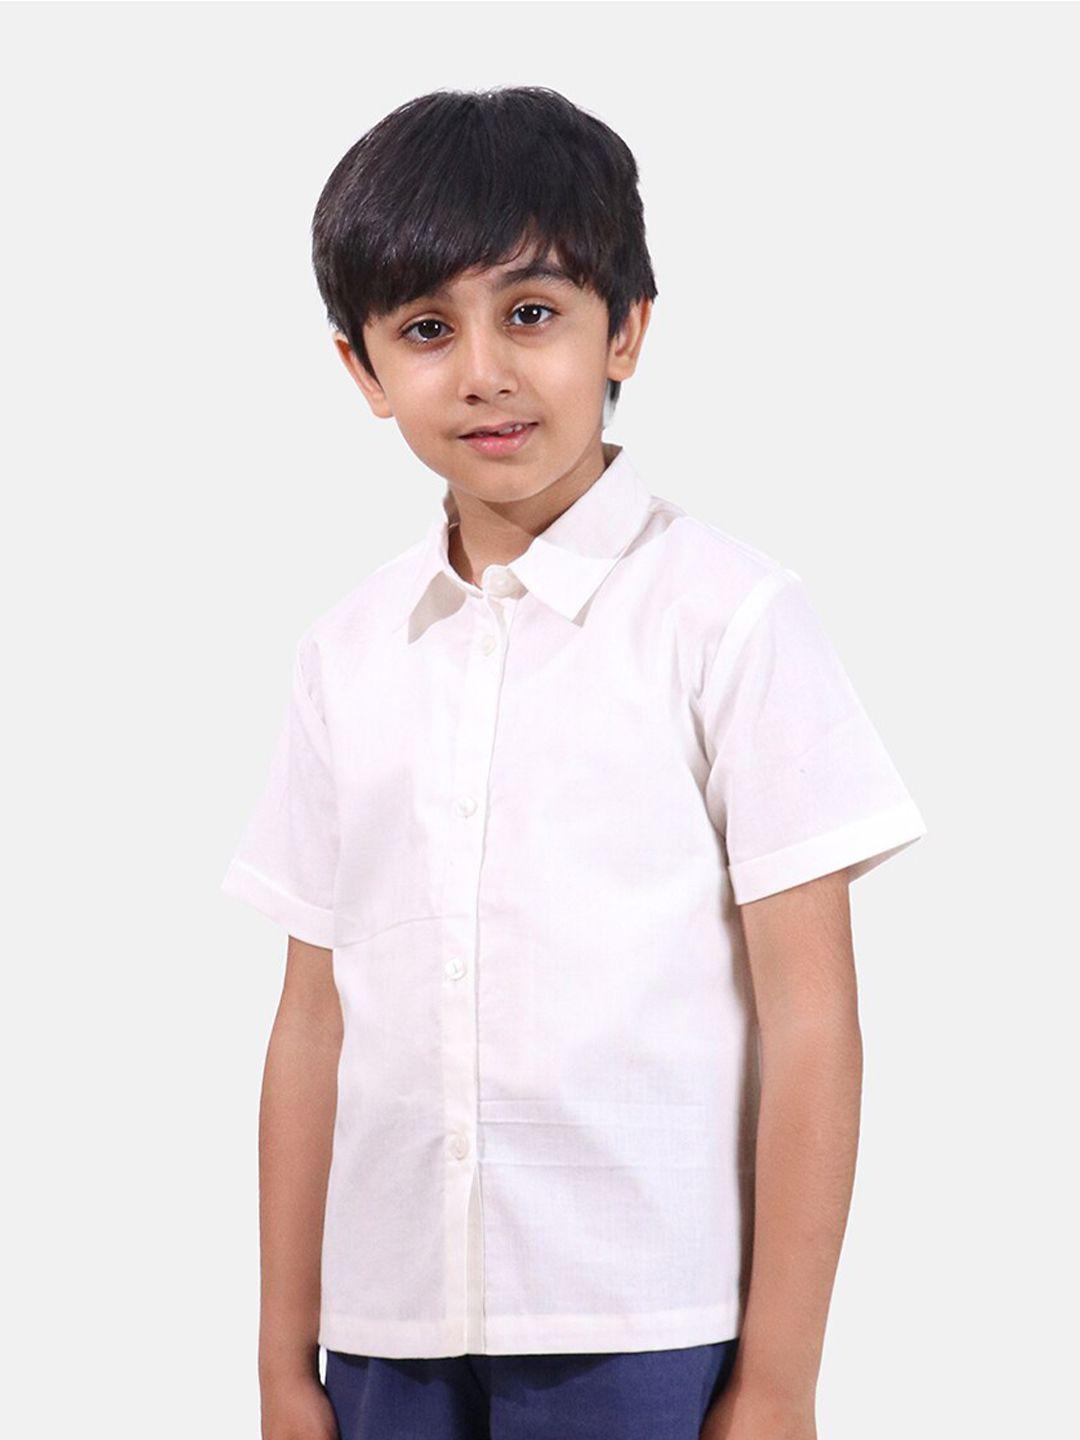 whistle & hops boys classic spread collar pure cotton casual shirt